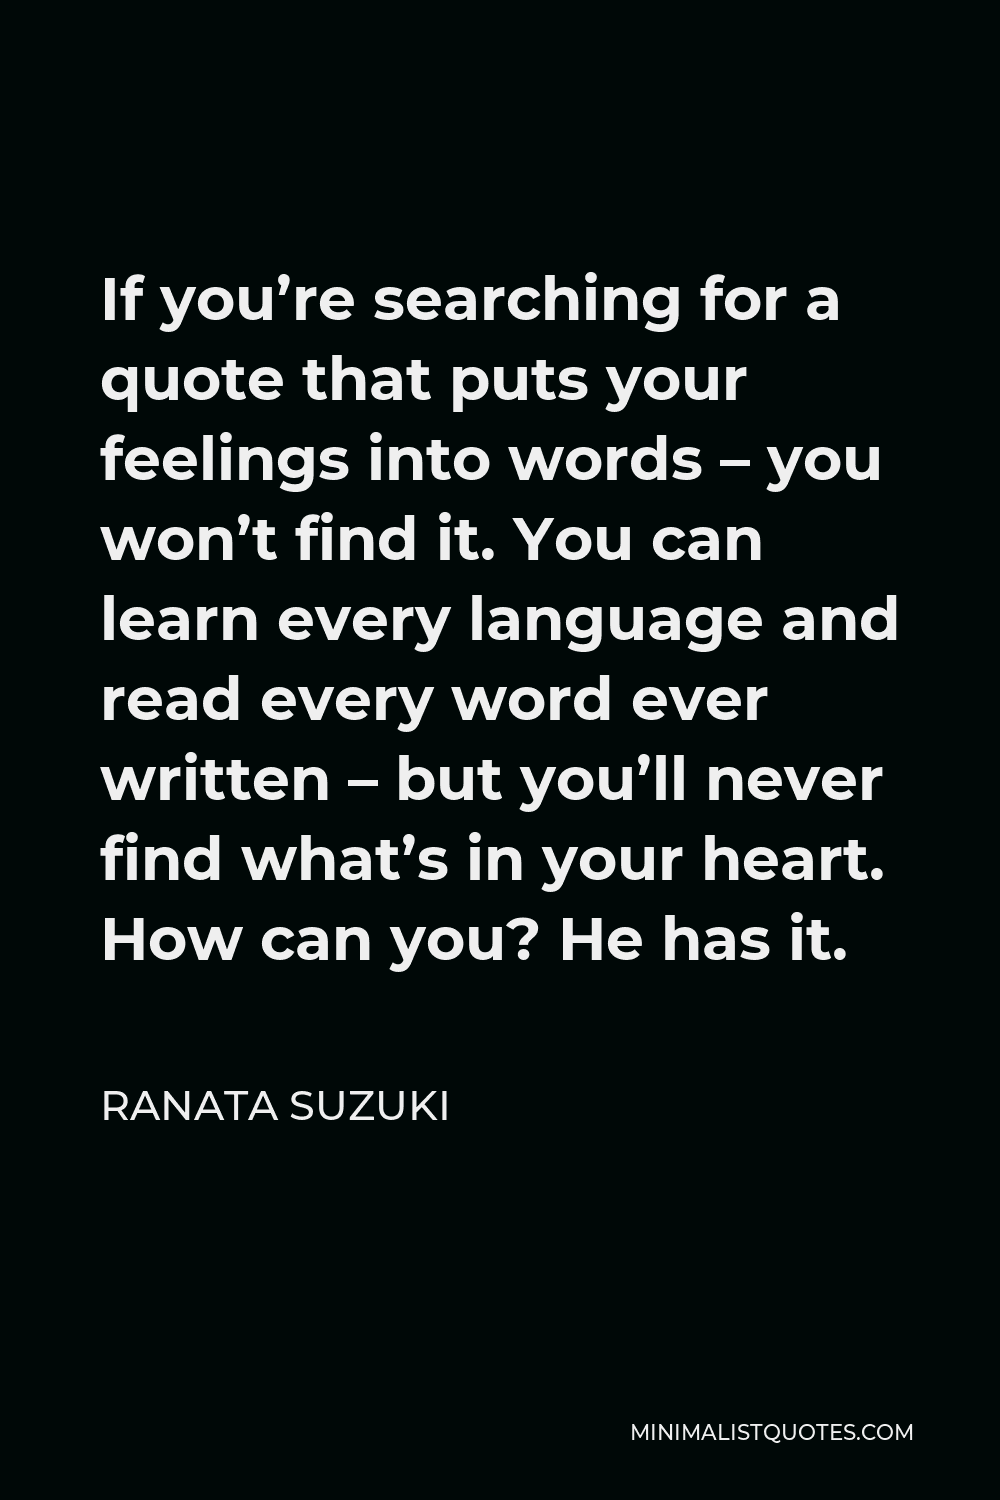 Ranata Suzuki Quote - If you’re searching for a quote that puts your feelings into words – you won’t find it. You can learn every language and read every word ever written – but you’ll never find what’s in your heart. How can you? He has it.